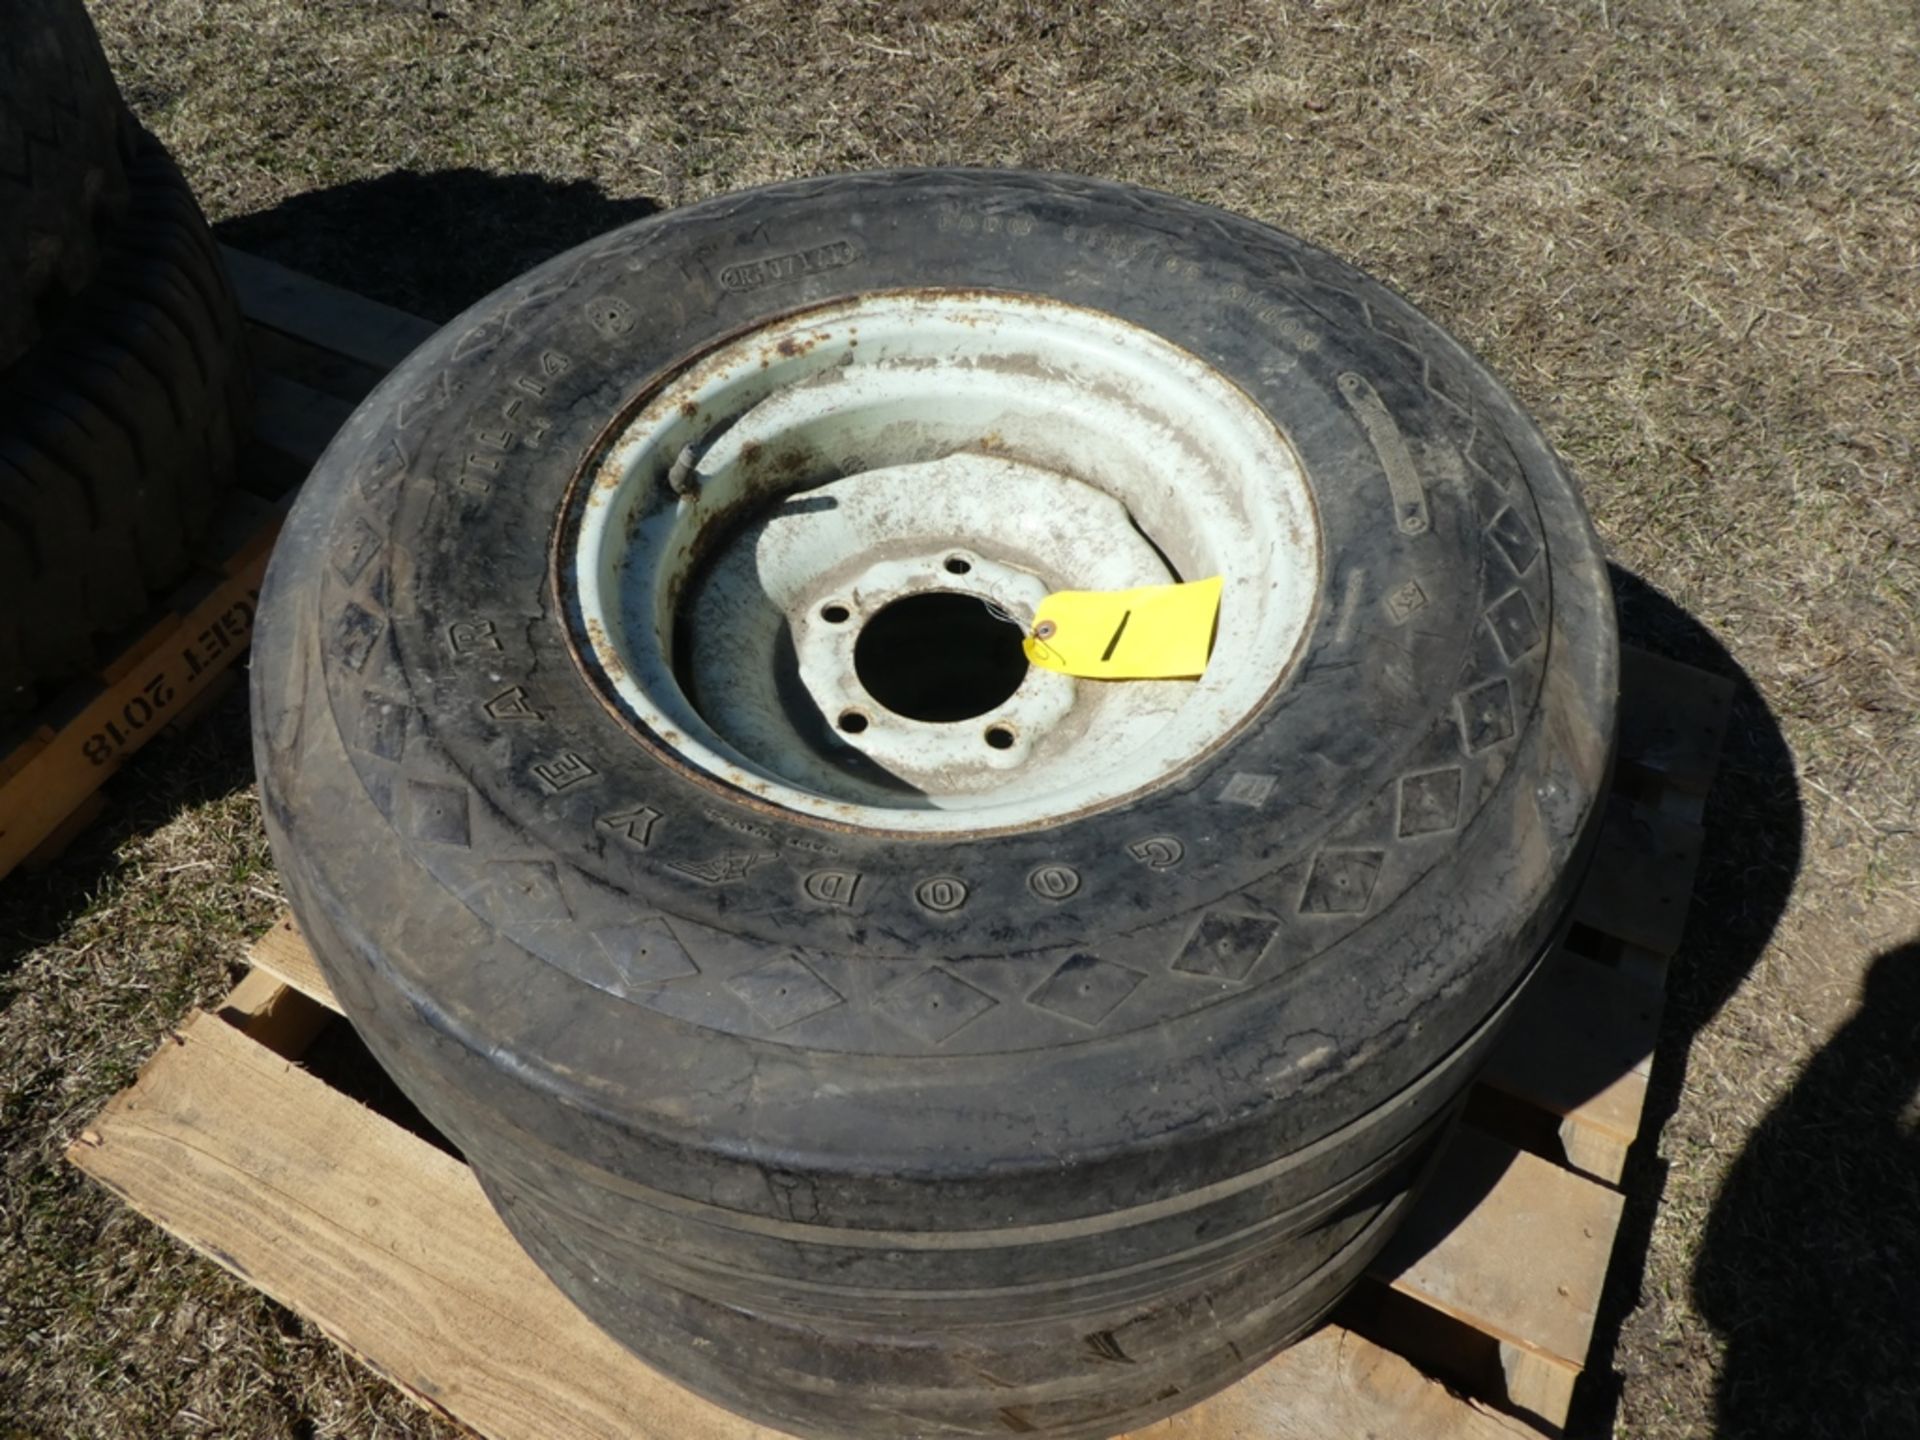 2-GOODYEAR 11L14 IMPLEMPENT TIRES & 5 BOLT RIMS - Image 2 of 2